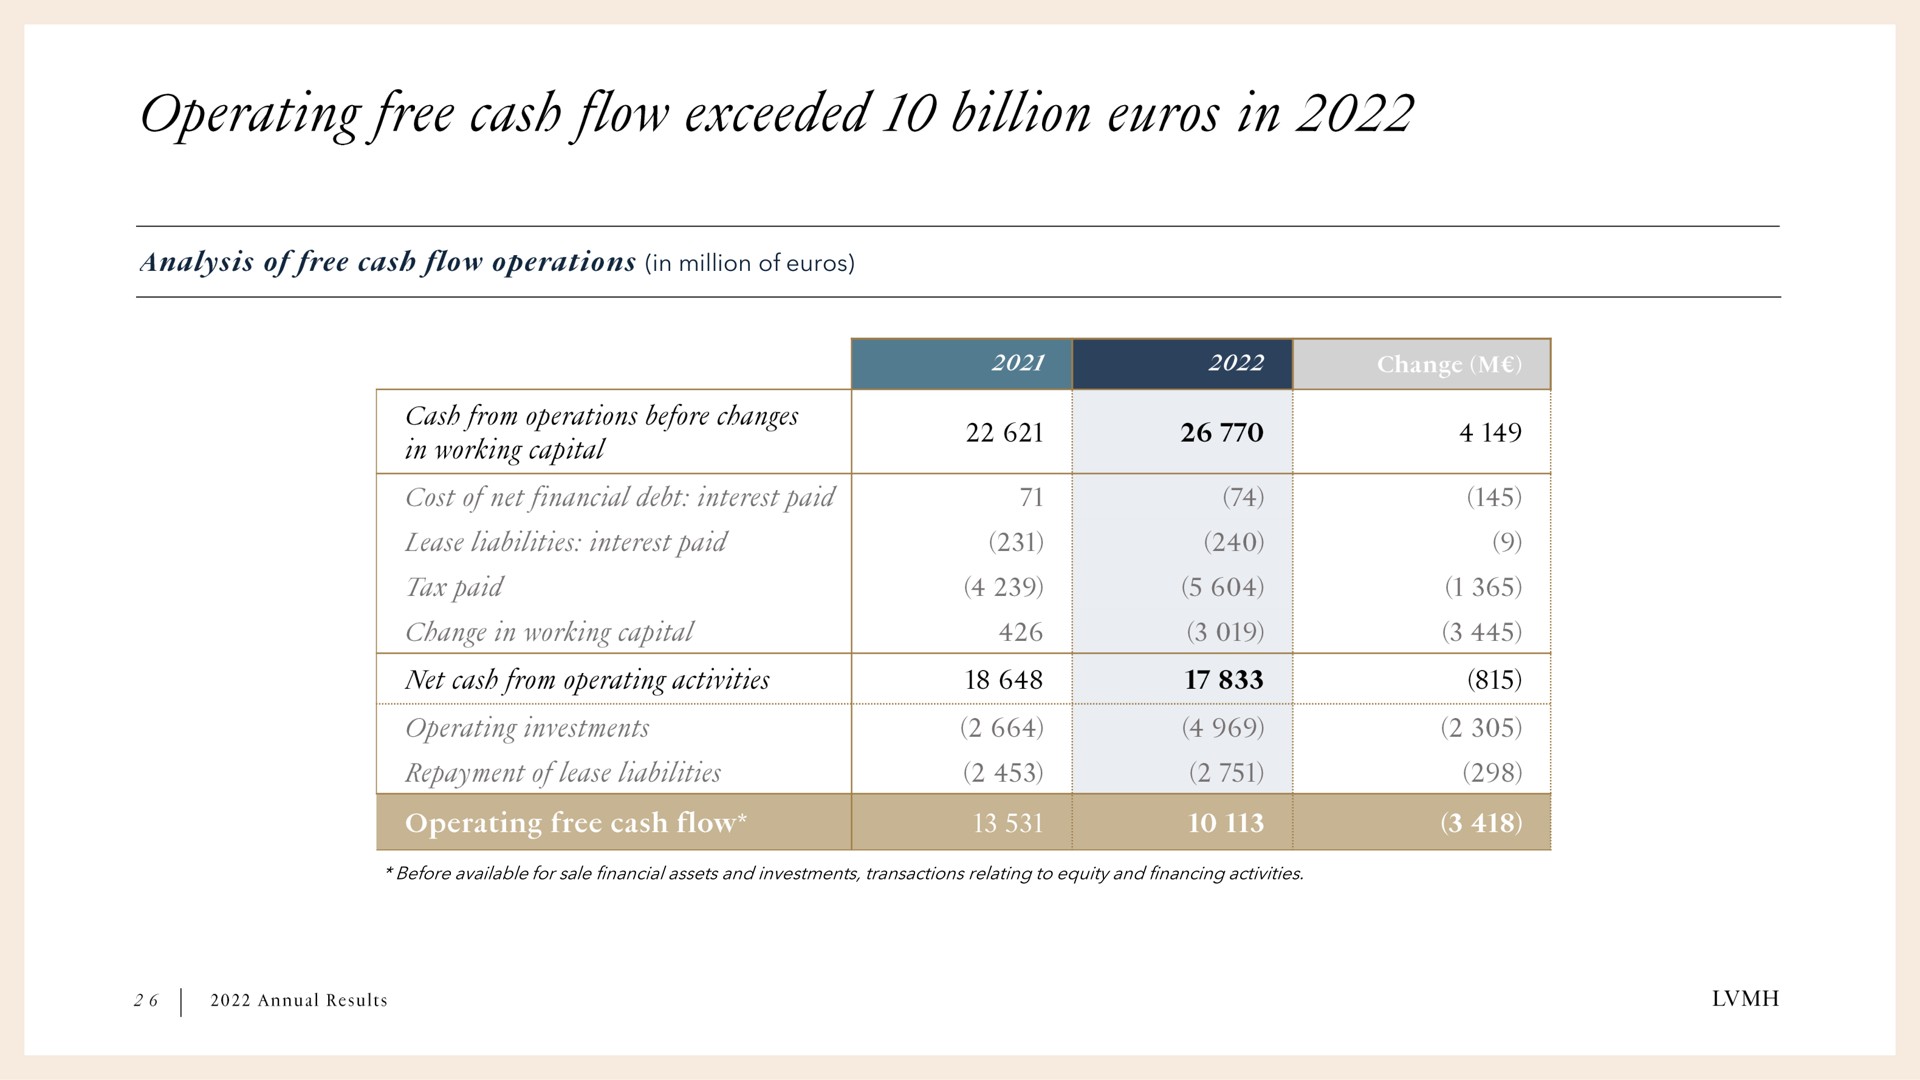 in million of operating free cash flow exceeded | LVMH